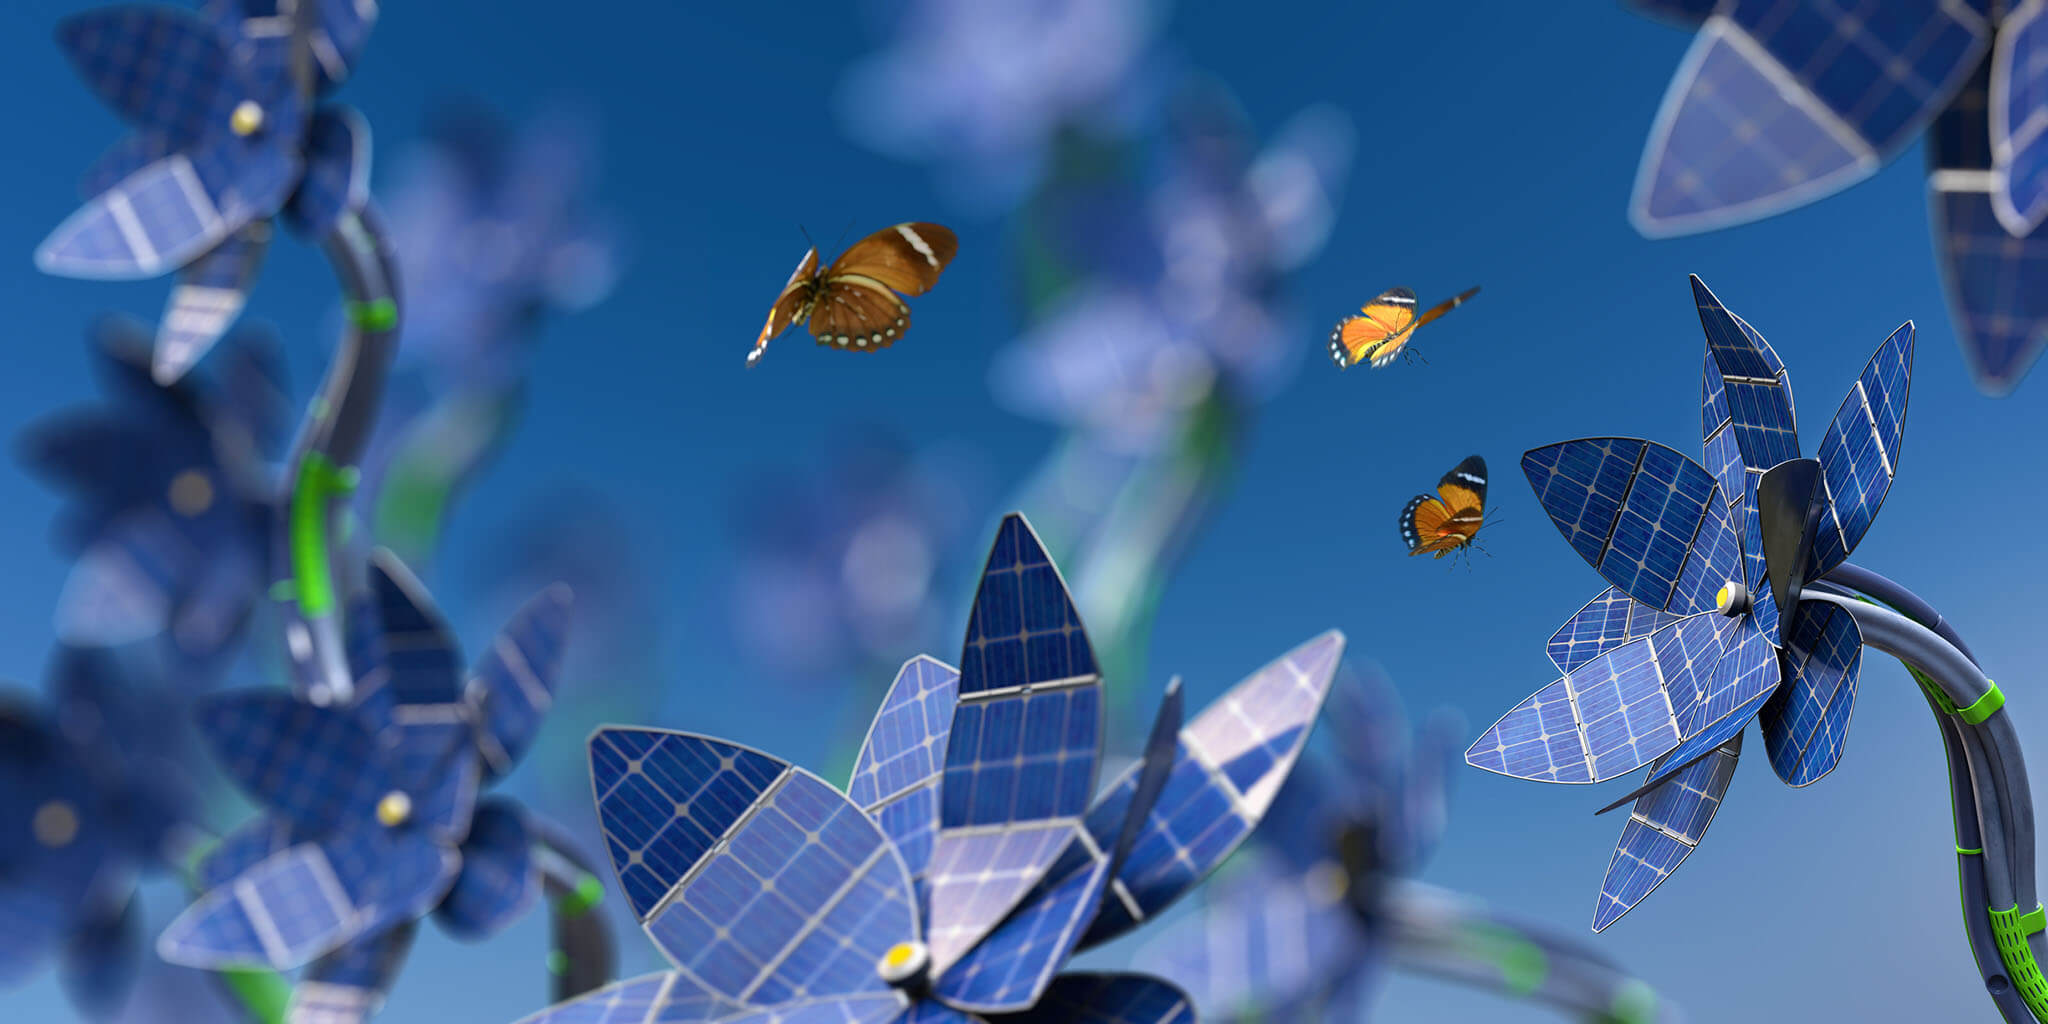 Environmental management: A macro image with shallow depth of field of a group of futuristic flowers with petals made from solar panels and stem made from cables. Three Orange Forester butterflies are in mid flight amongst the flowers. Butterflies have blurred motion. Focus is on the flower on the right hand side.